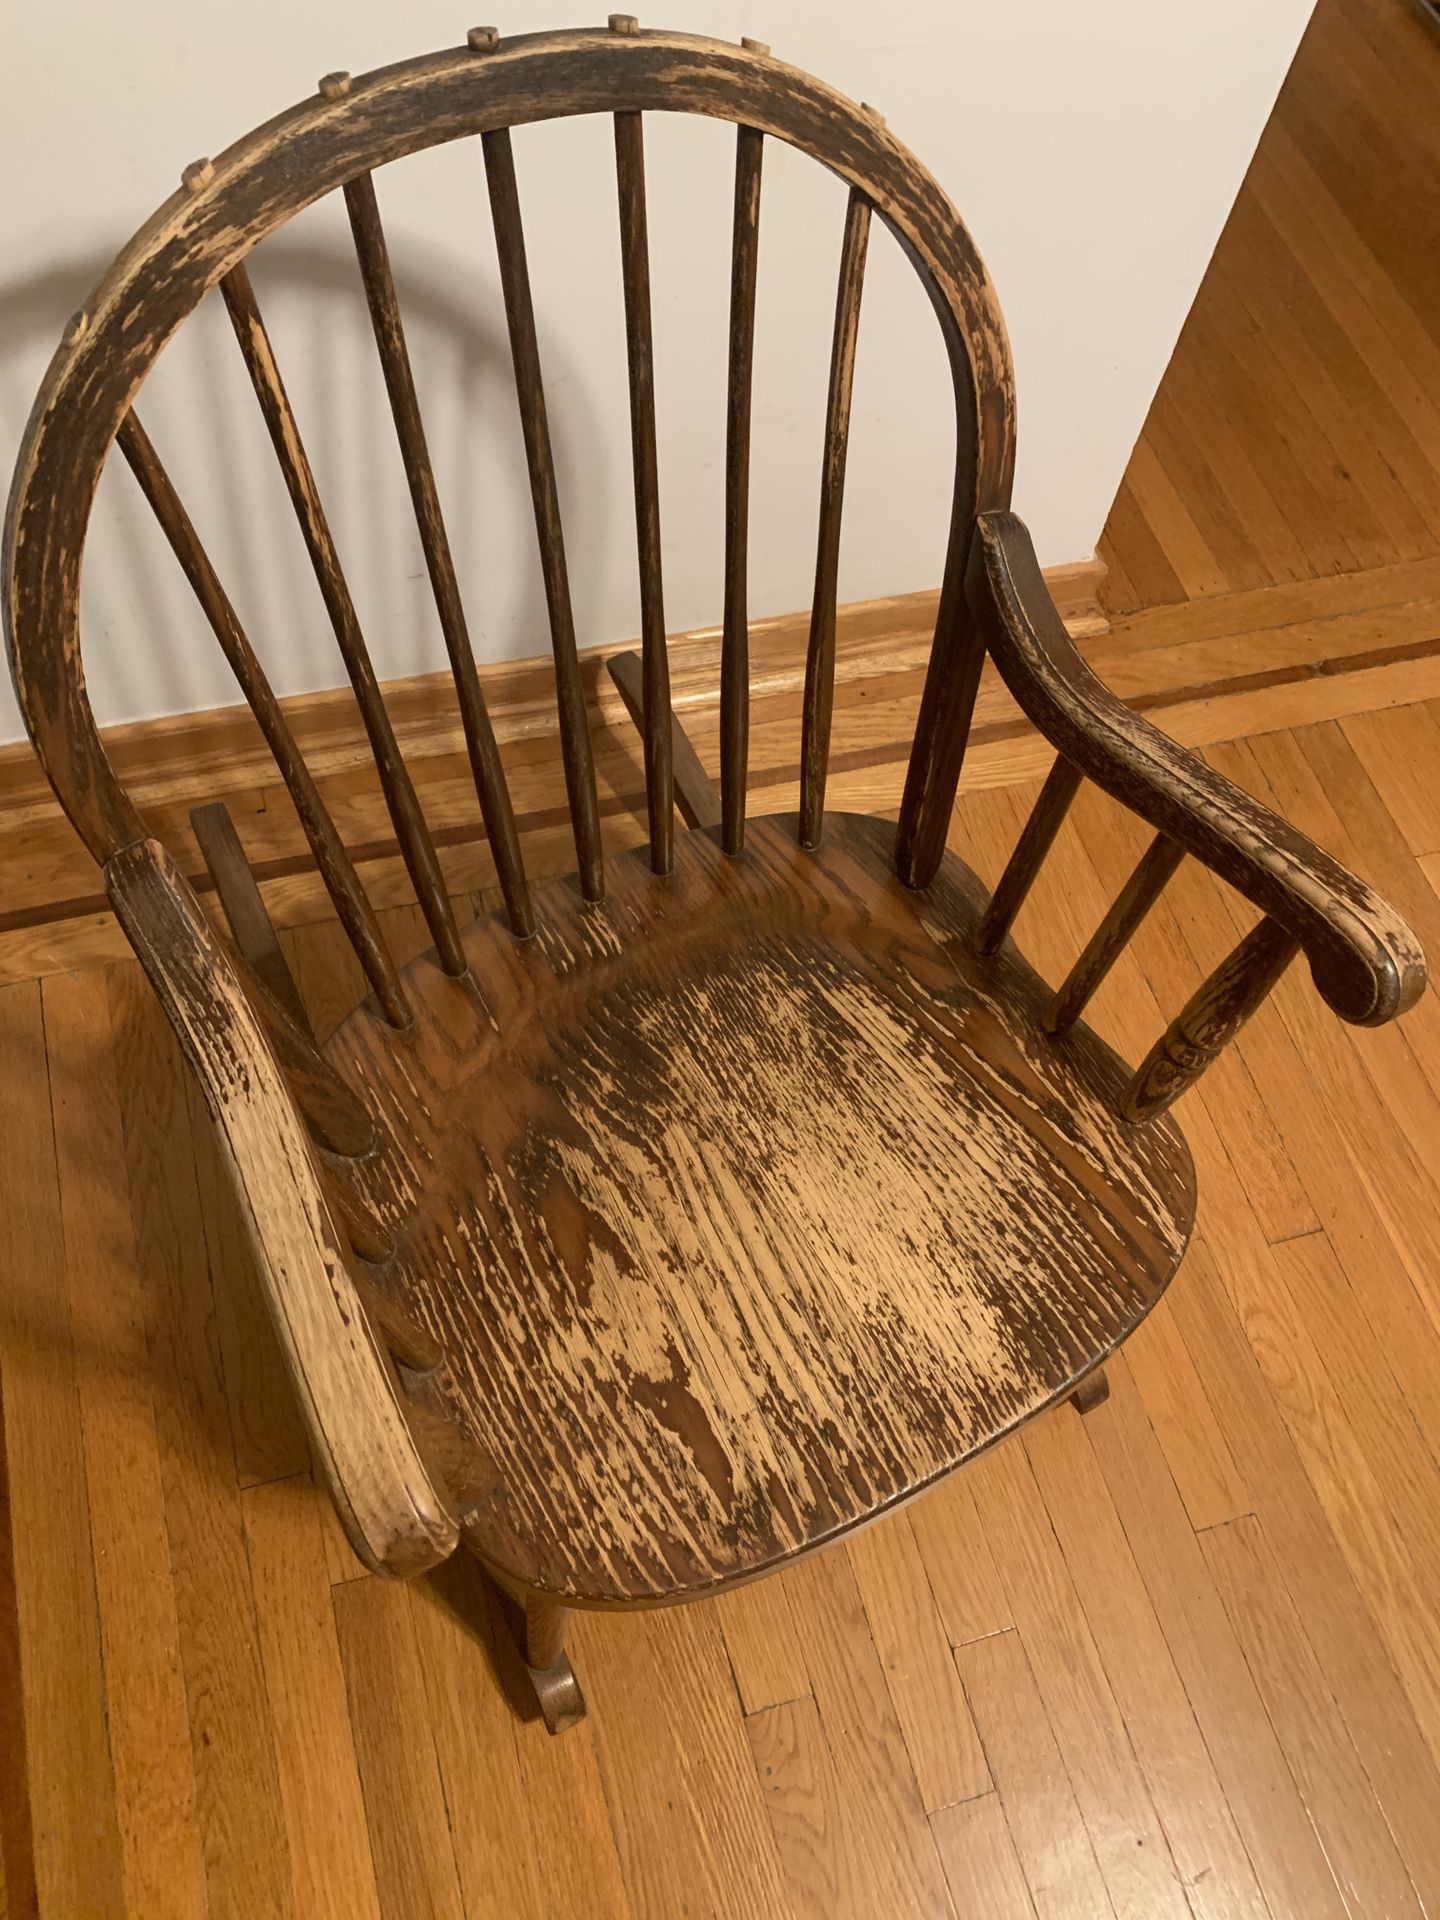 Antique Wood Rocking Chair